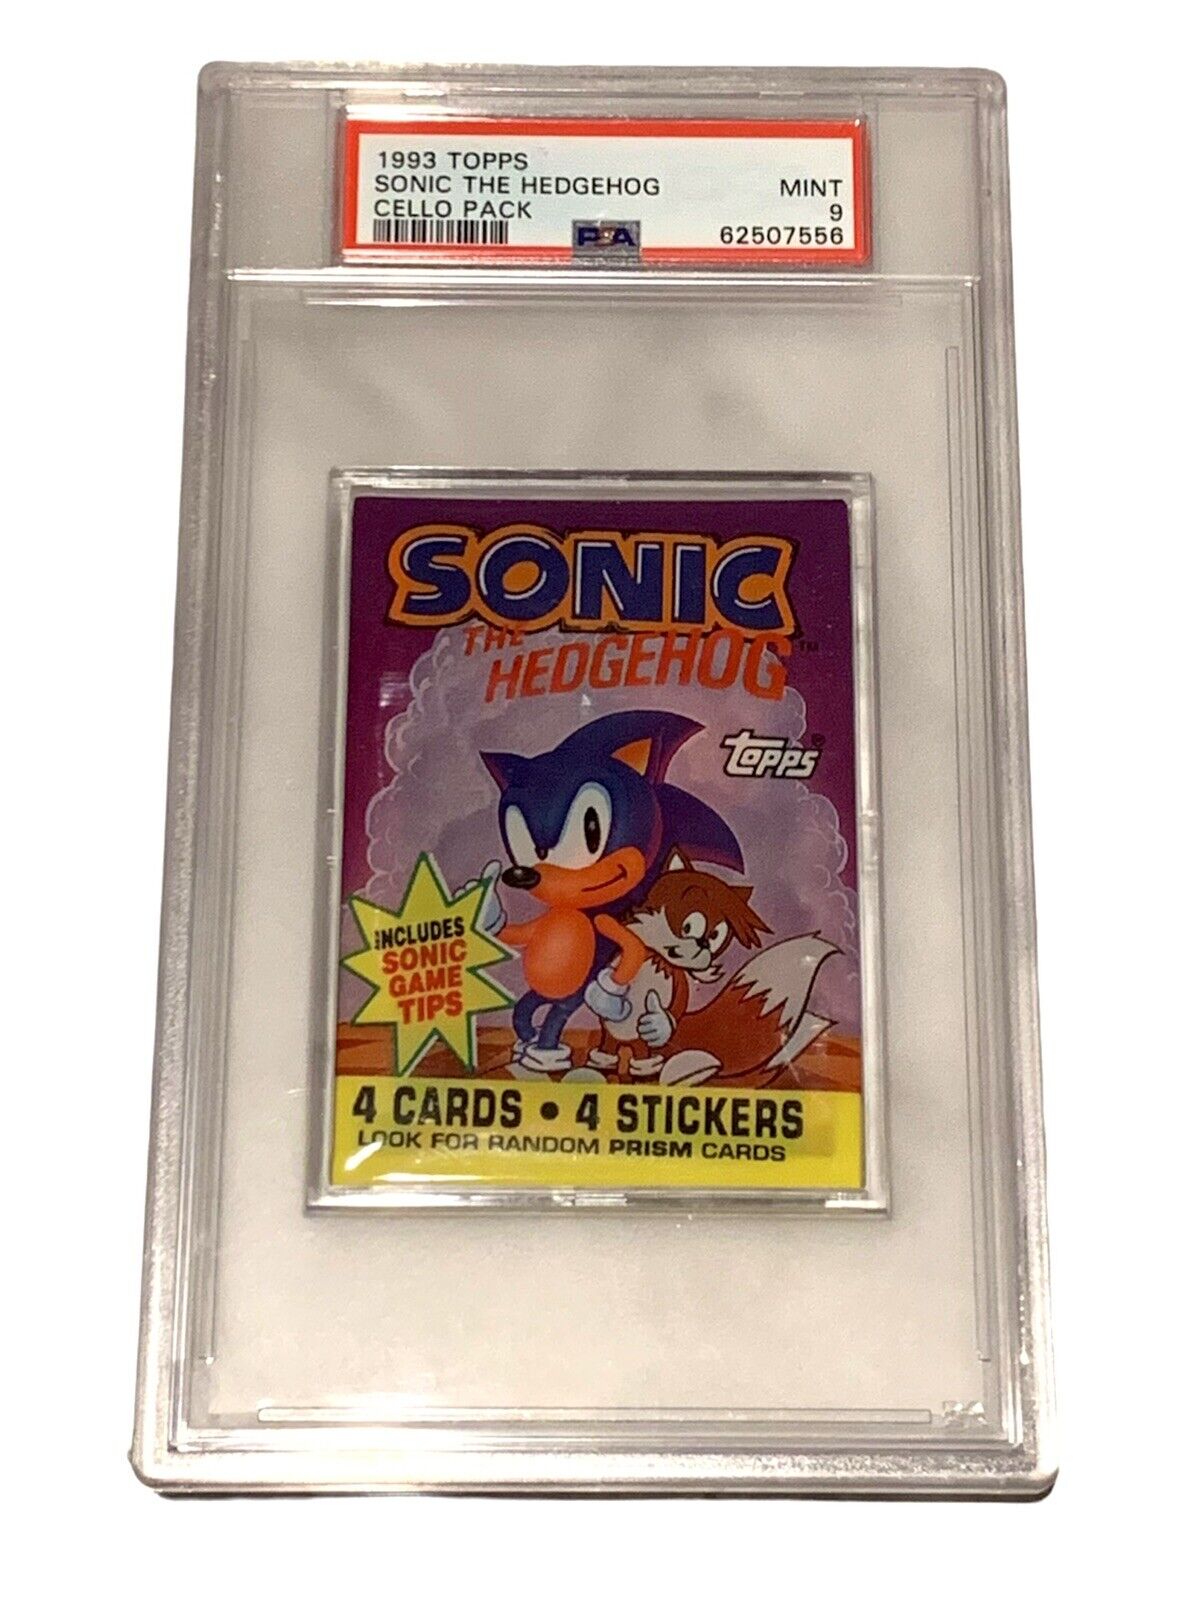 1993 Topps SONIC THE HEDGEHOG Cello Pack Sealed PSA 9 Mint